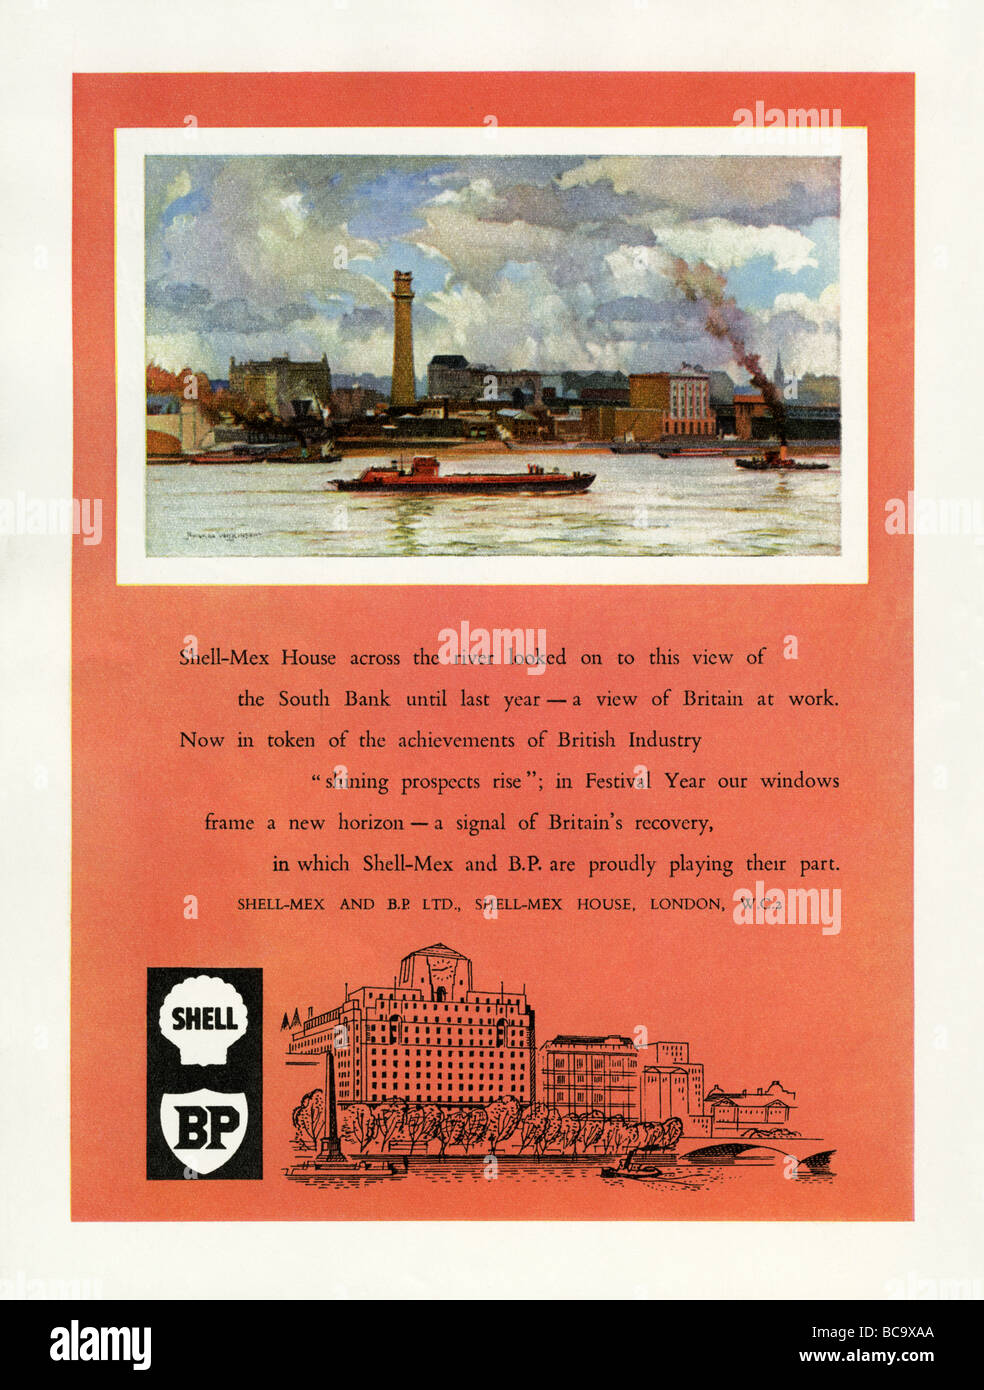 1951 colour advertisement for Shell and BP featuring Shell-Mex House and a 1950 view across the River Thames at Embankment Stock Photo